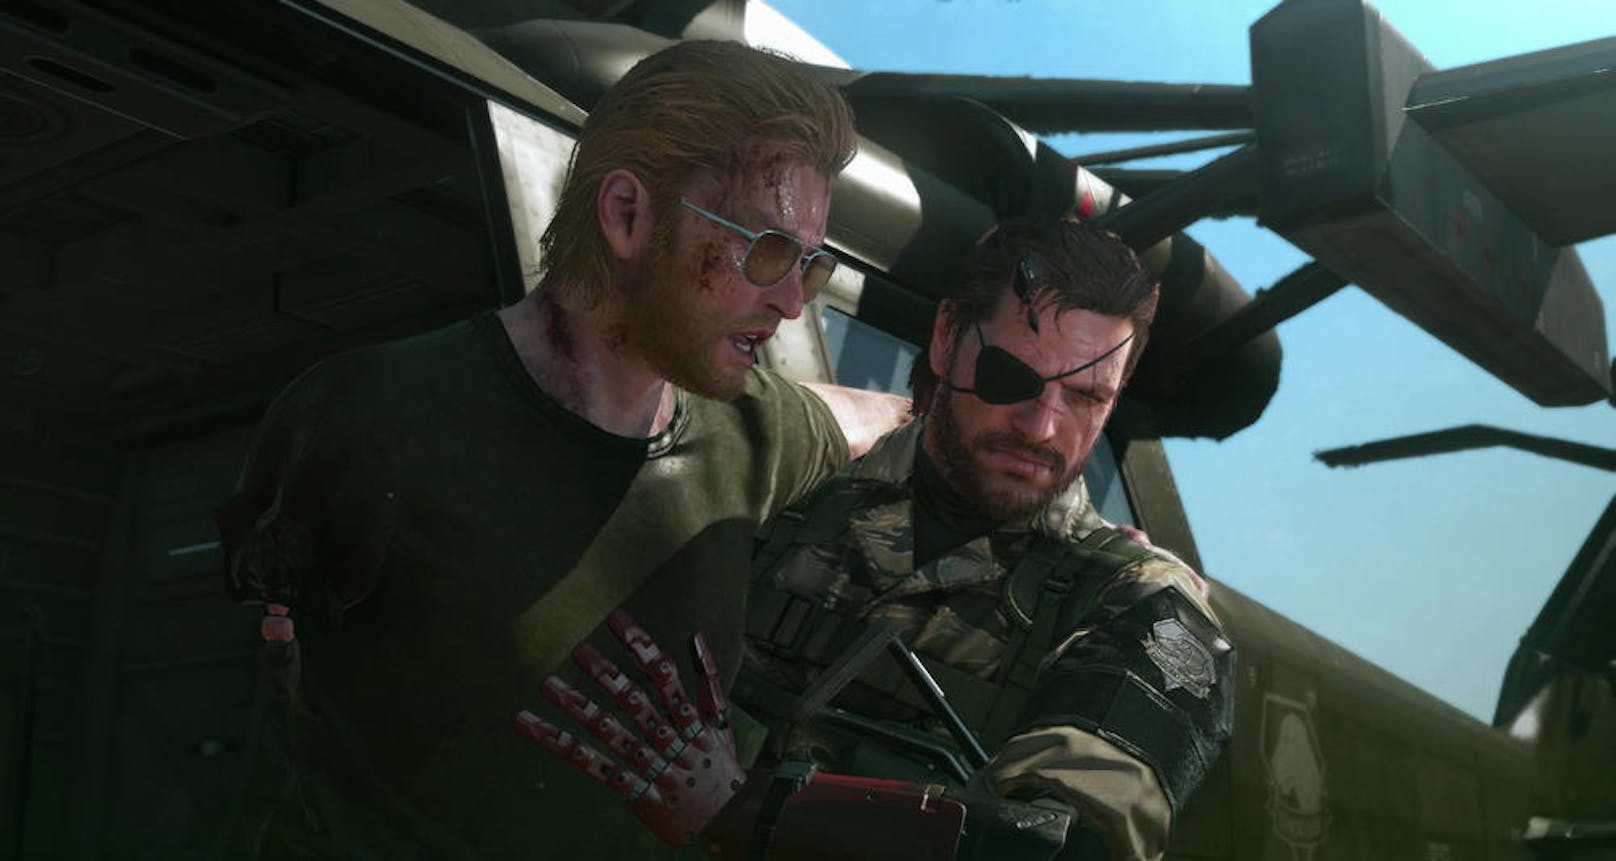  <a href="https://www.heute.at/digital/games/story/Metal-Gear-Solid-V--The-Phantom-Pain-im-Test-24101826" target="_blank">Metal Gear Solid V: Ground Zeroes & The Phantom Pain</a>